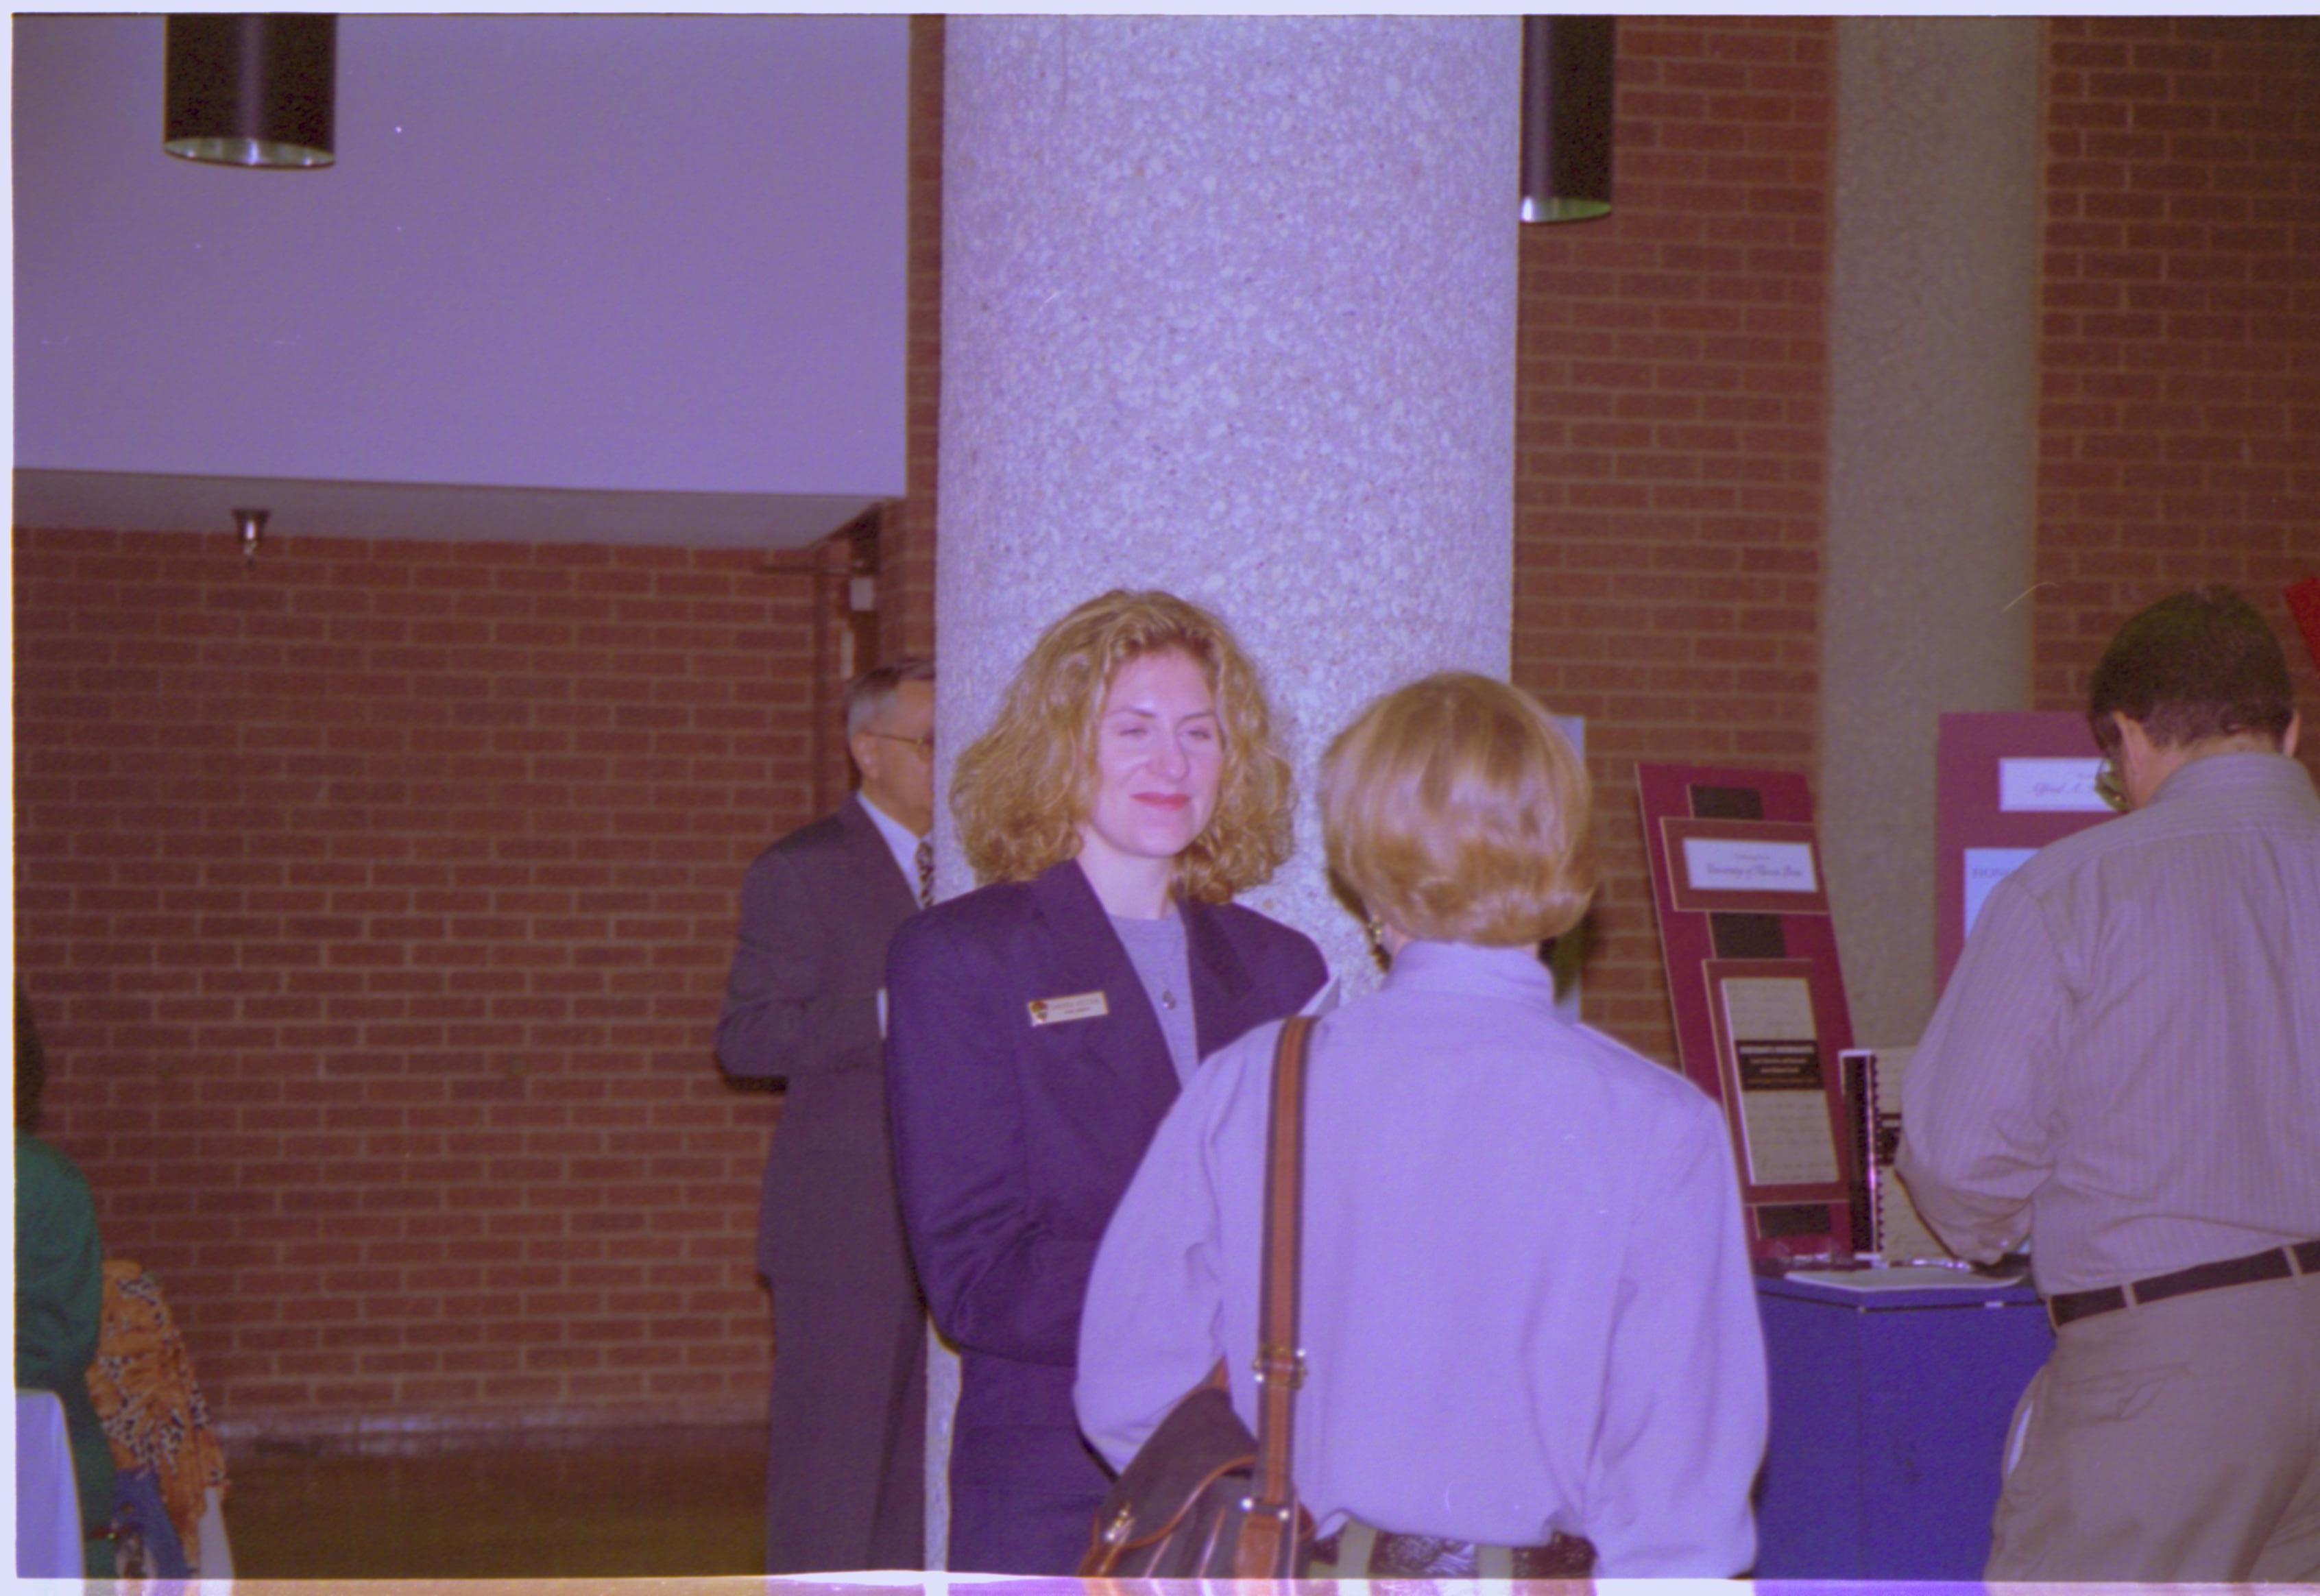 Two ladies talking, man looking at books. 3-1997 Colloq (color); 19 Colloquium, 1997